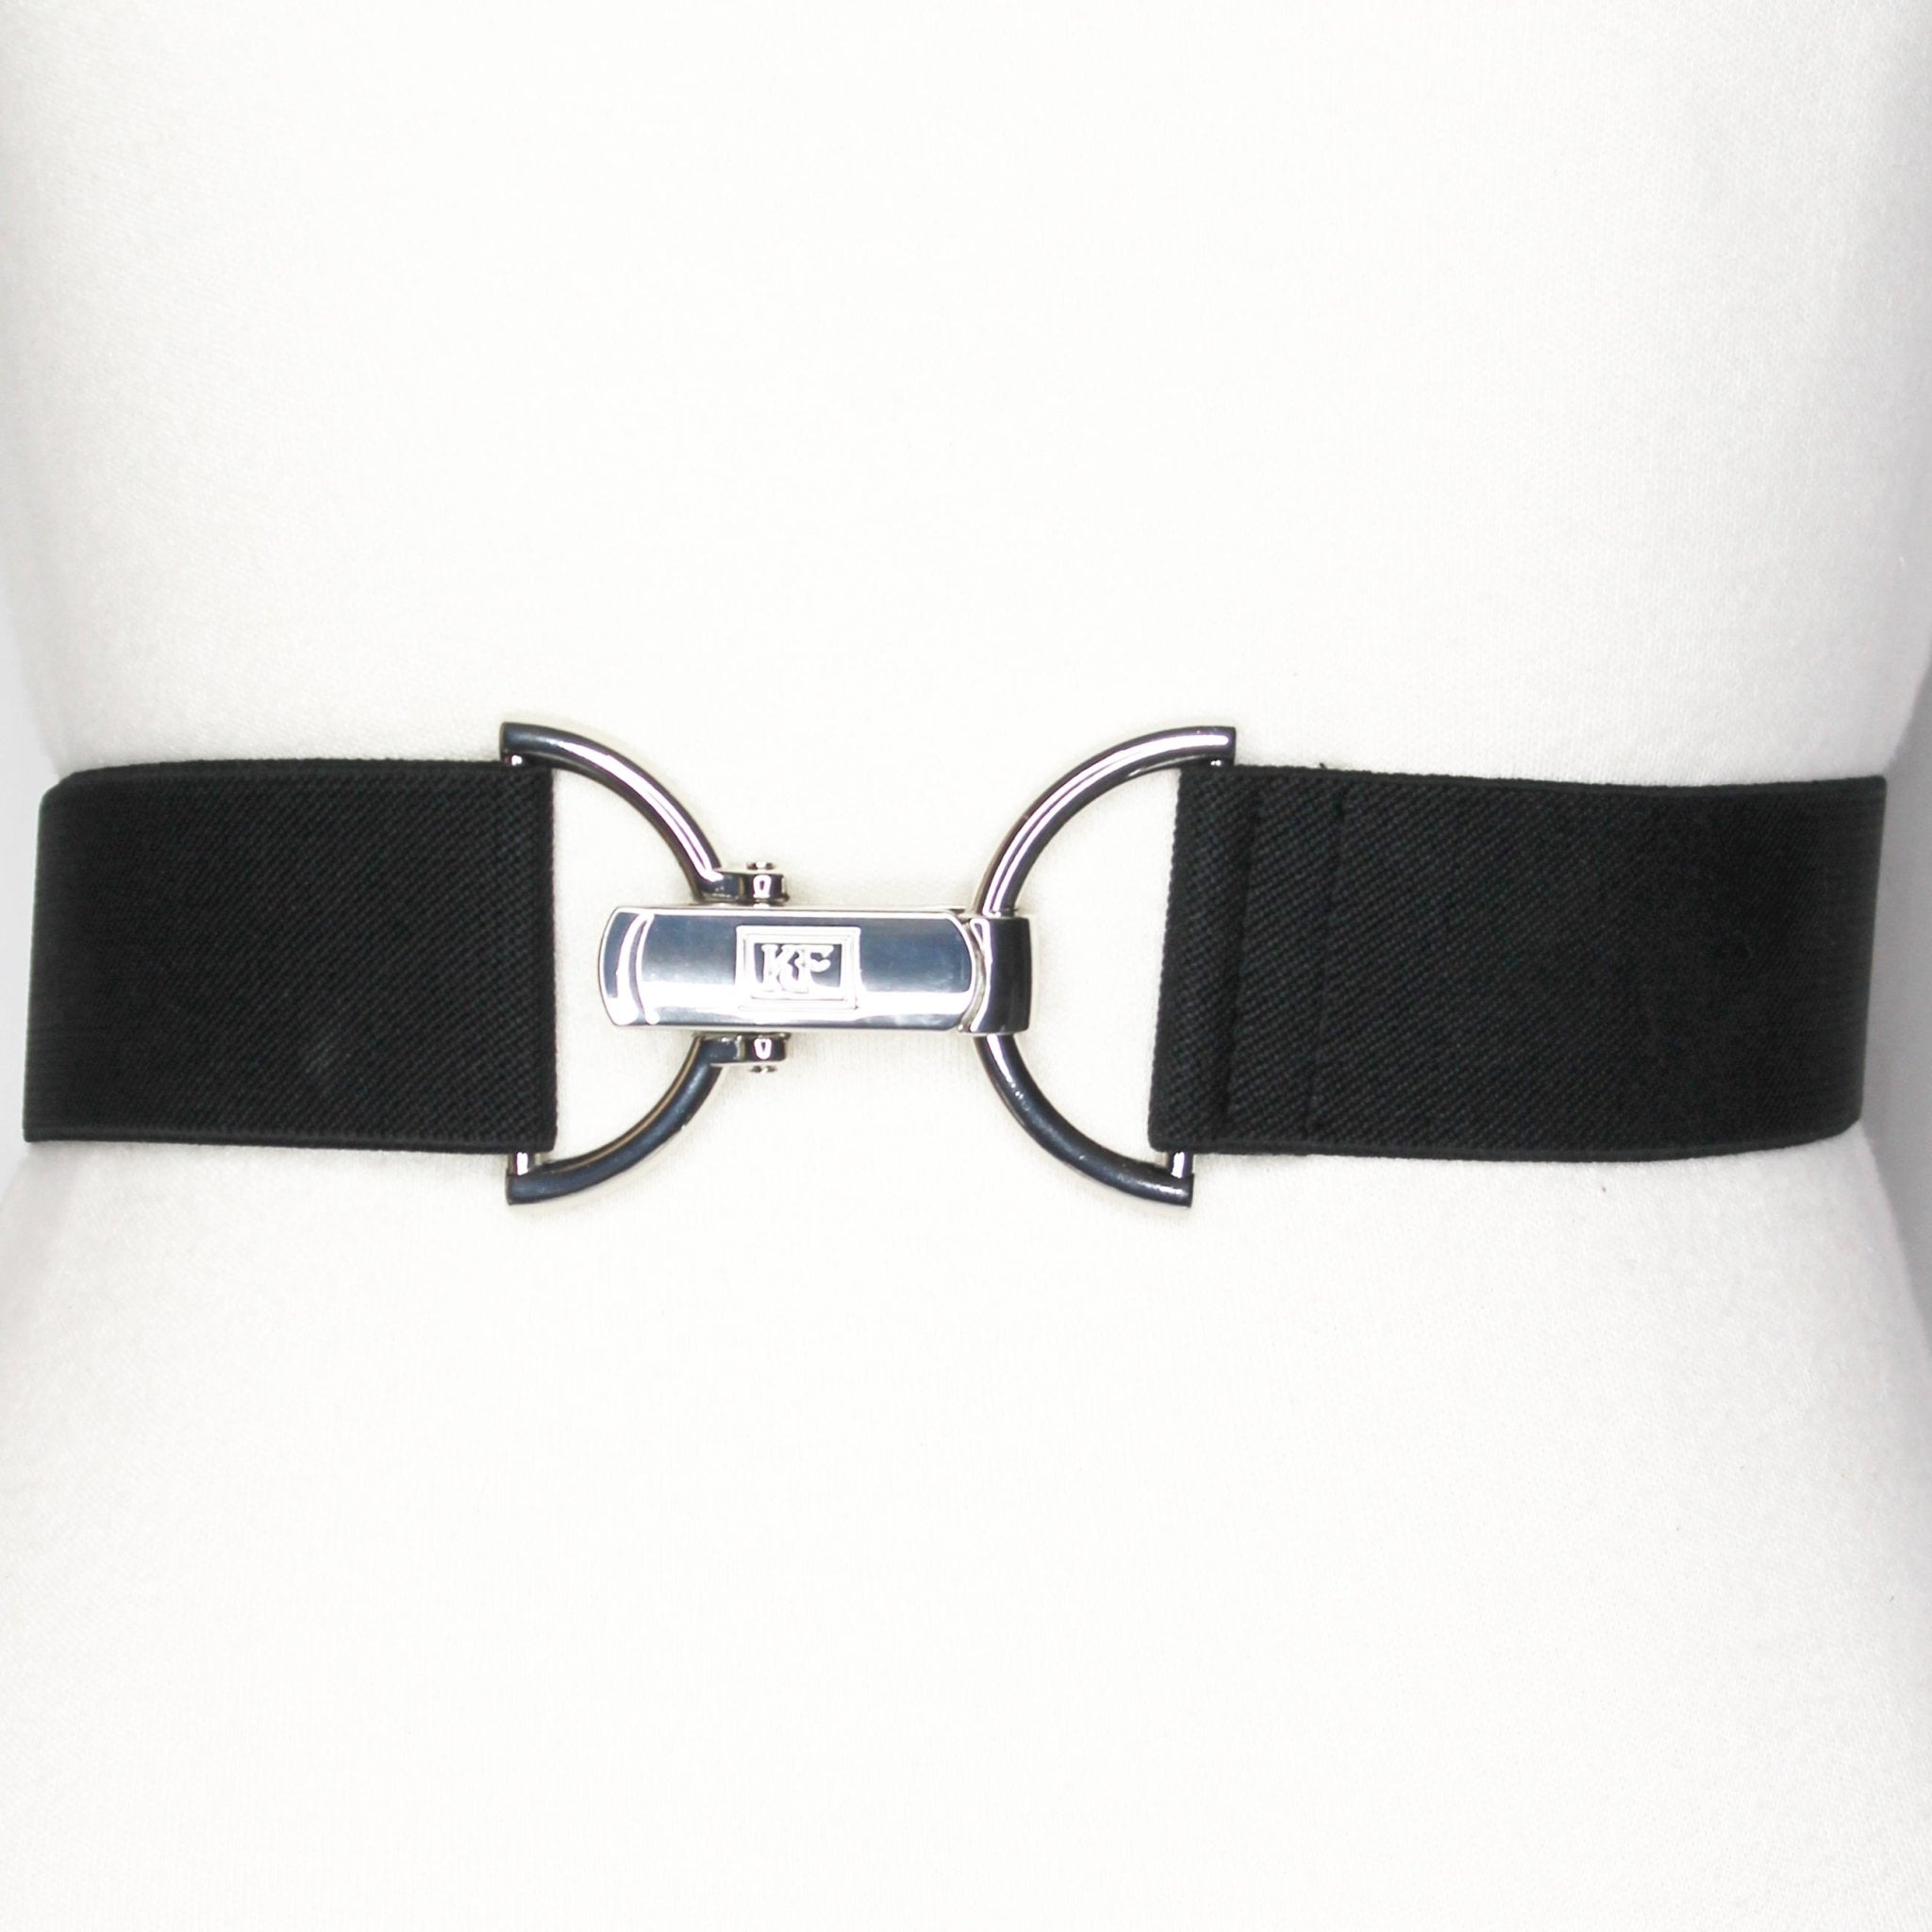 Belts – Equiluxe Tack